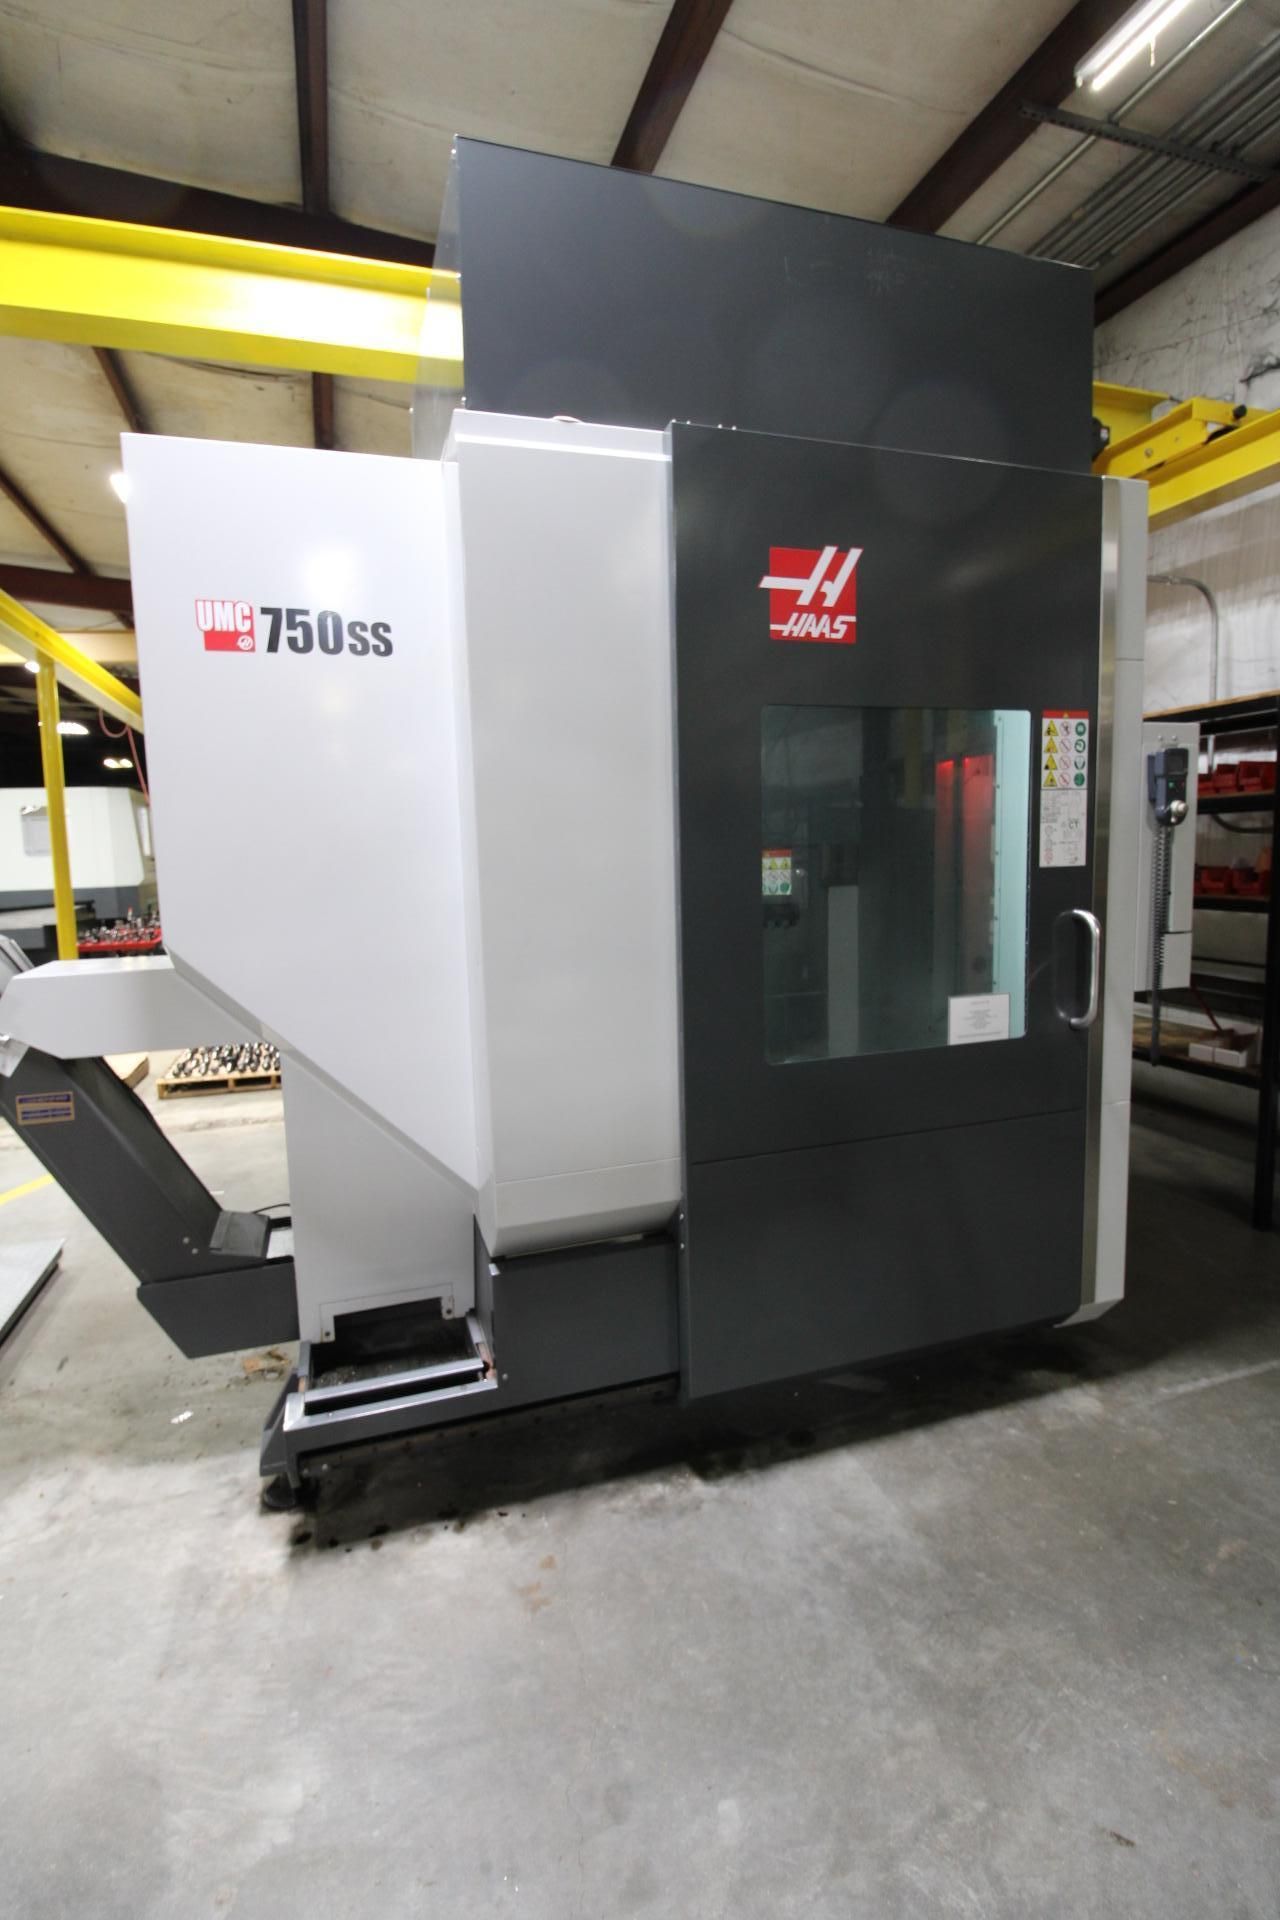 5-AXIS UNIVERSAL MACHINING CENTER, HAAS MDL. UMC750SS, new 2018, Haas CNC control, 30” X, 20” Y, 20” - Image 12 of 17